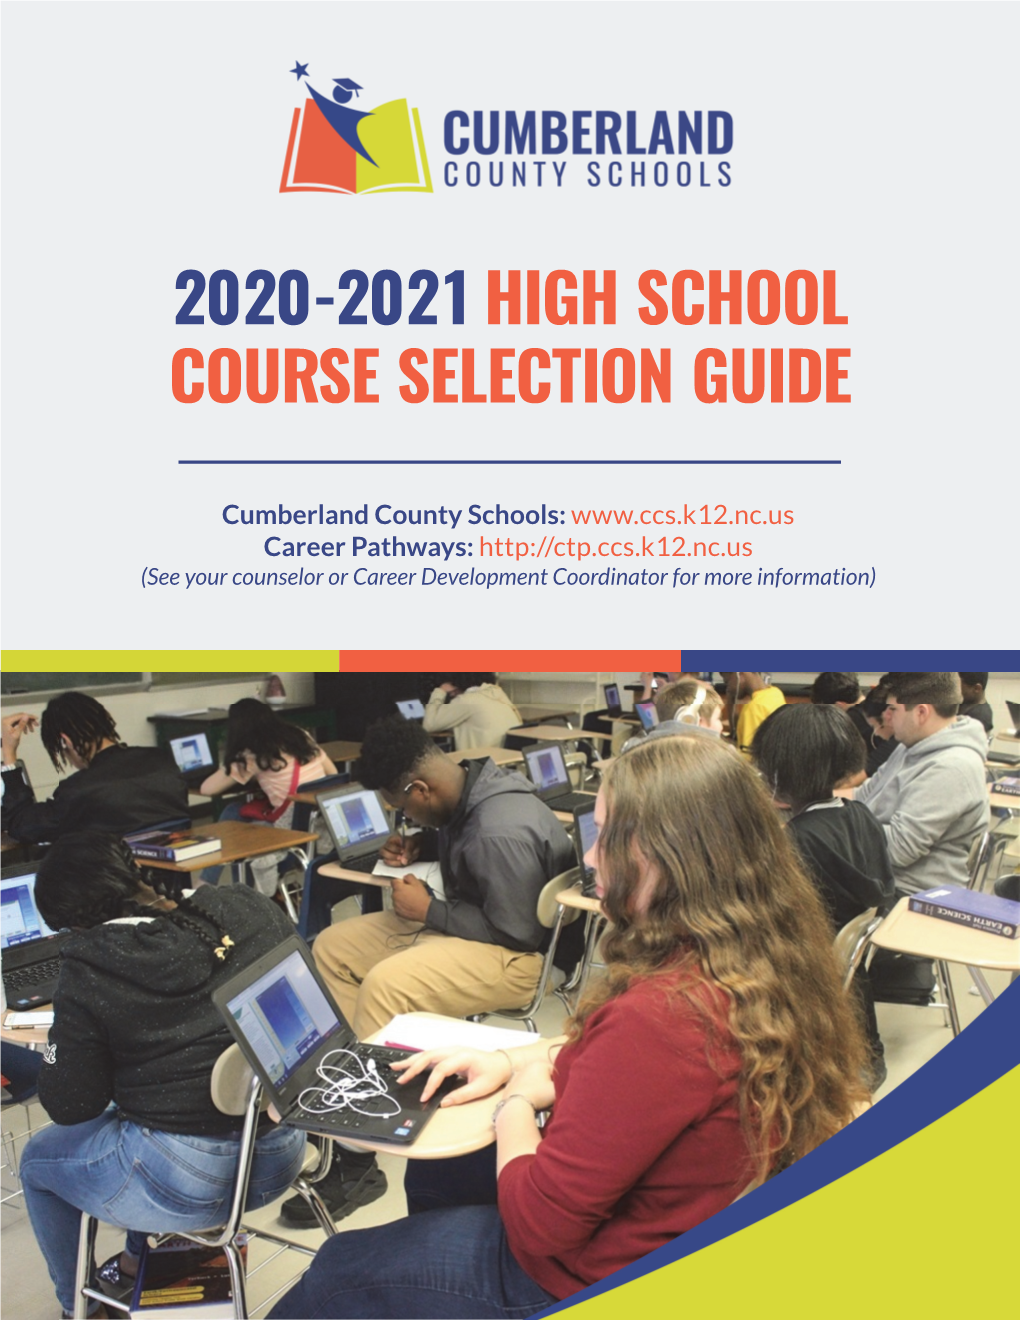 2020-2021 High School Course Selection Guide